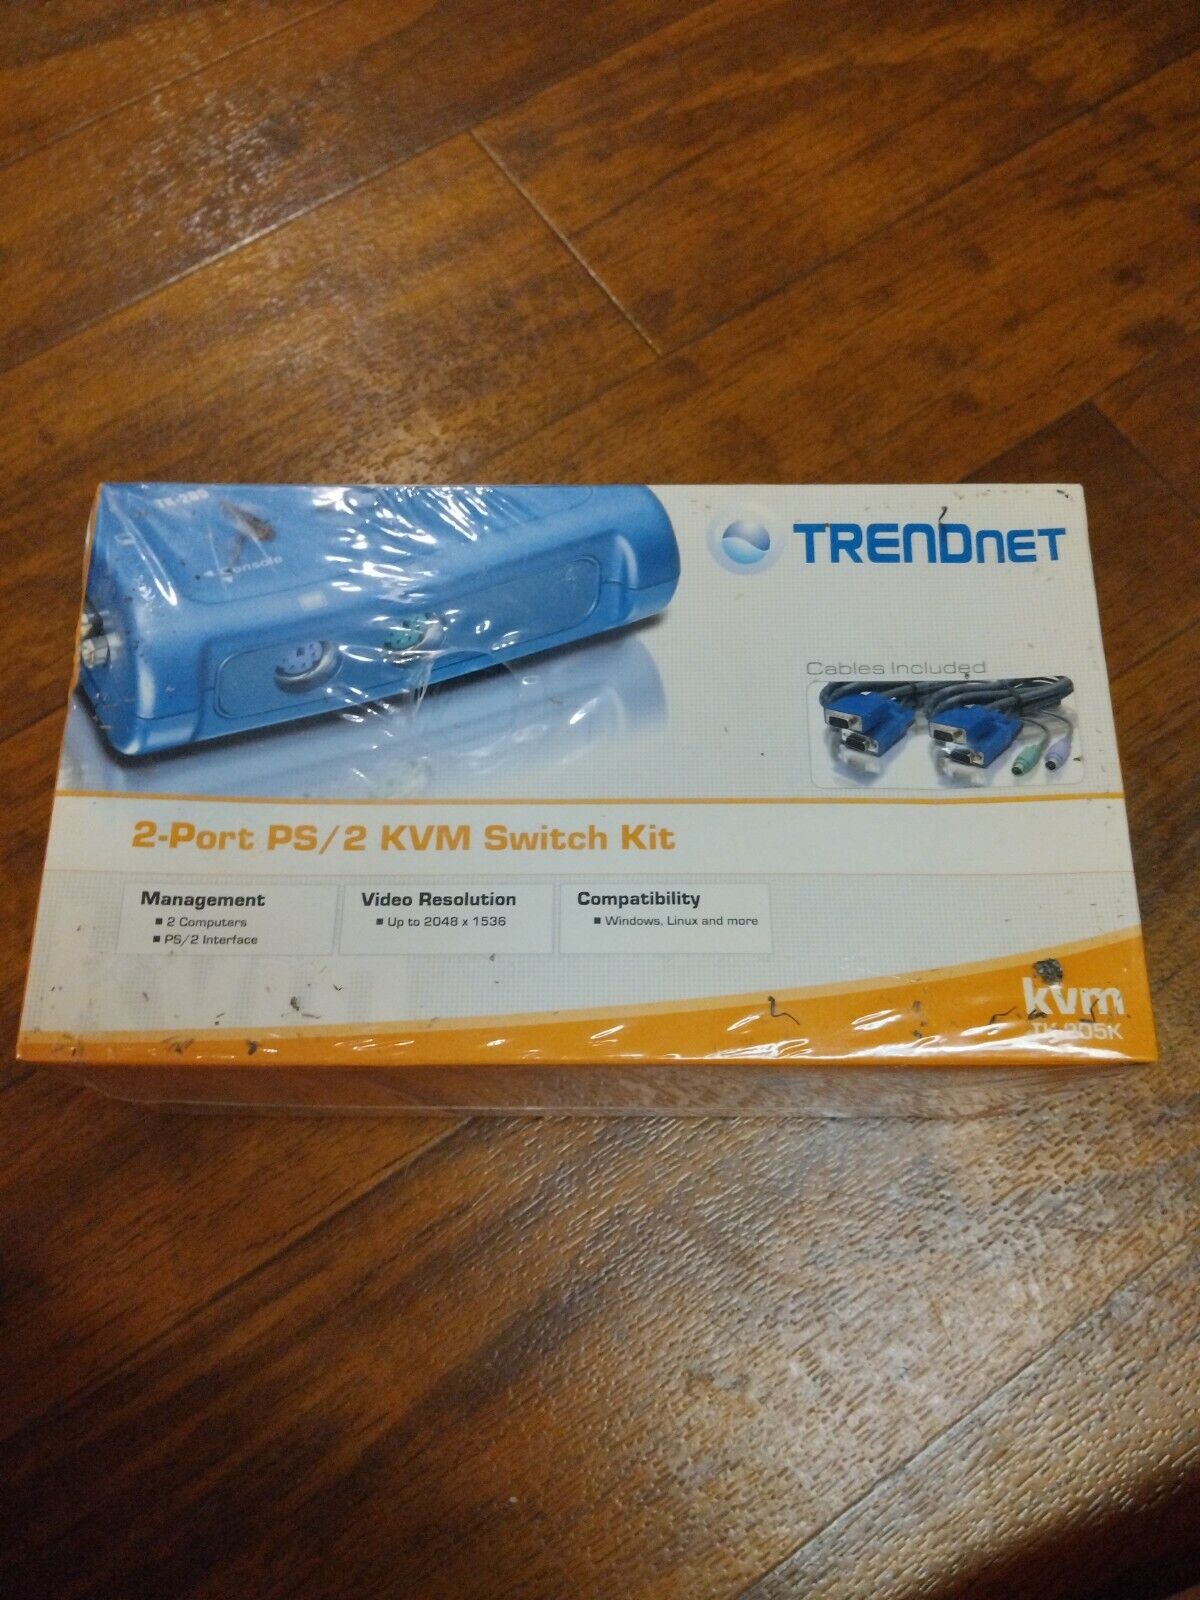 TrendNet 2-Port USB KVM Switchkit - BRAND NEW IN BOX - ALL CABLING INCLUDED